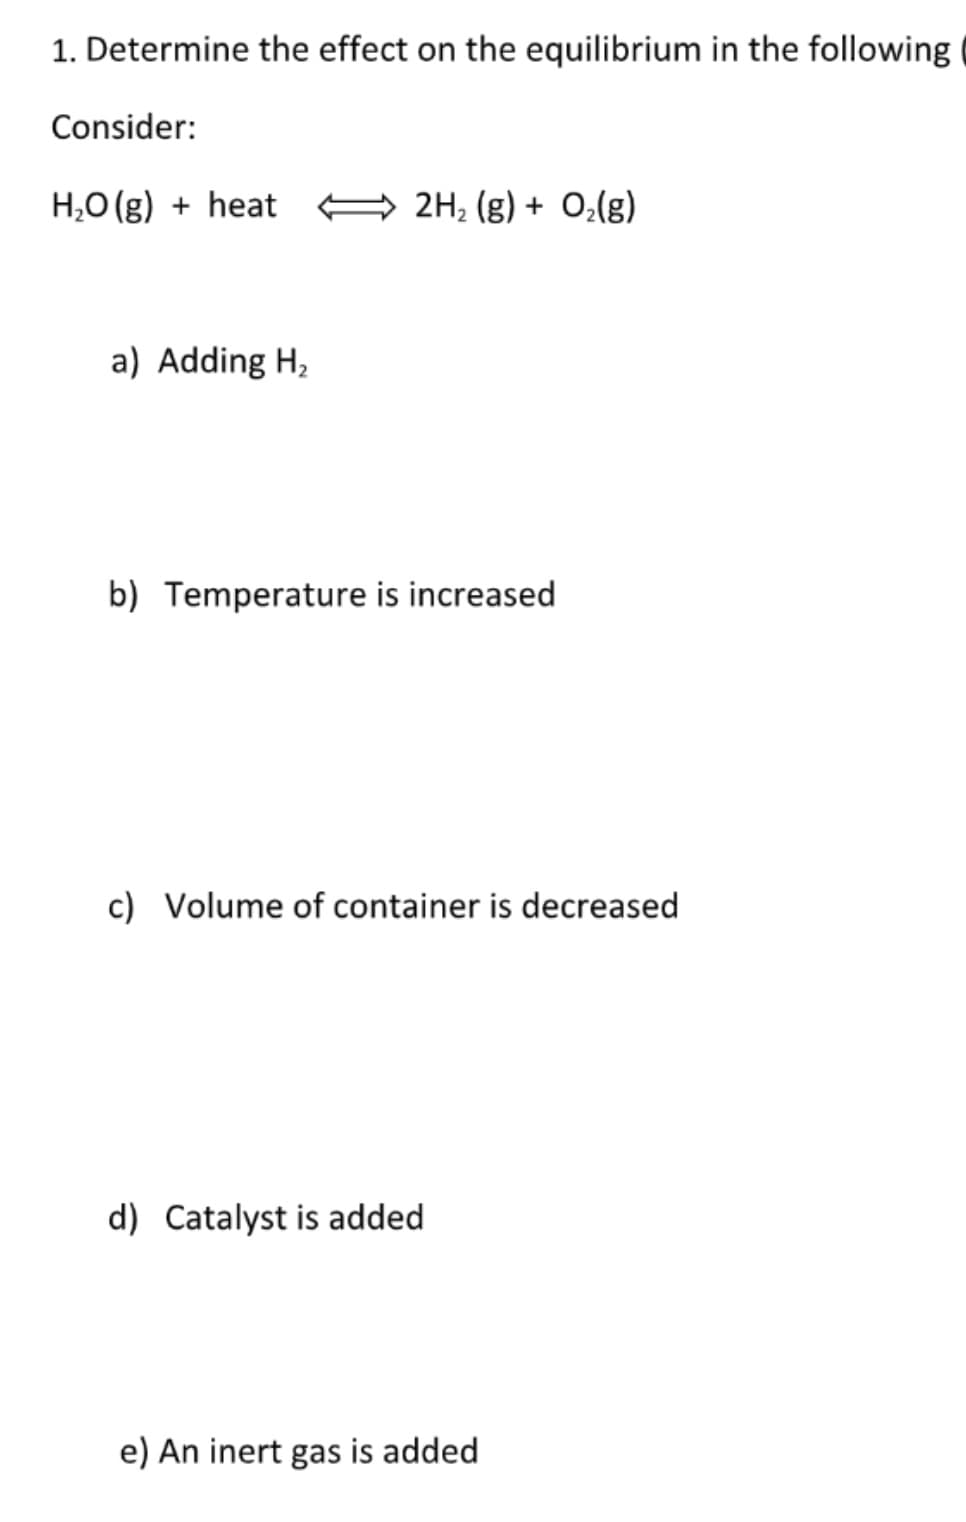 1. Determine the effect on the equilibrium in the following
Consider:
H,O (g) + heat
2H, (g) + 0,(g)
a) Adding H,
b) Temperature is increased
c) Volume of container is decreased
d) Catalyst is added
e) An inert gas is added
